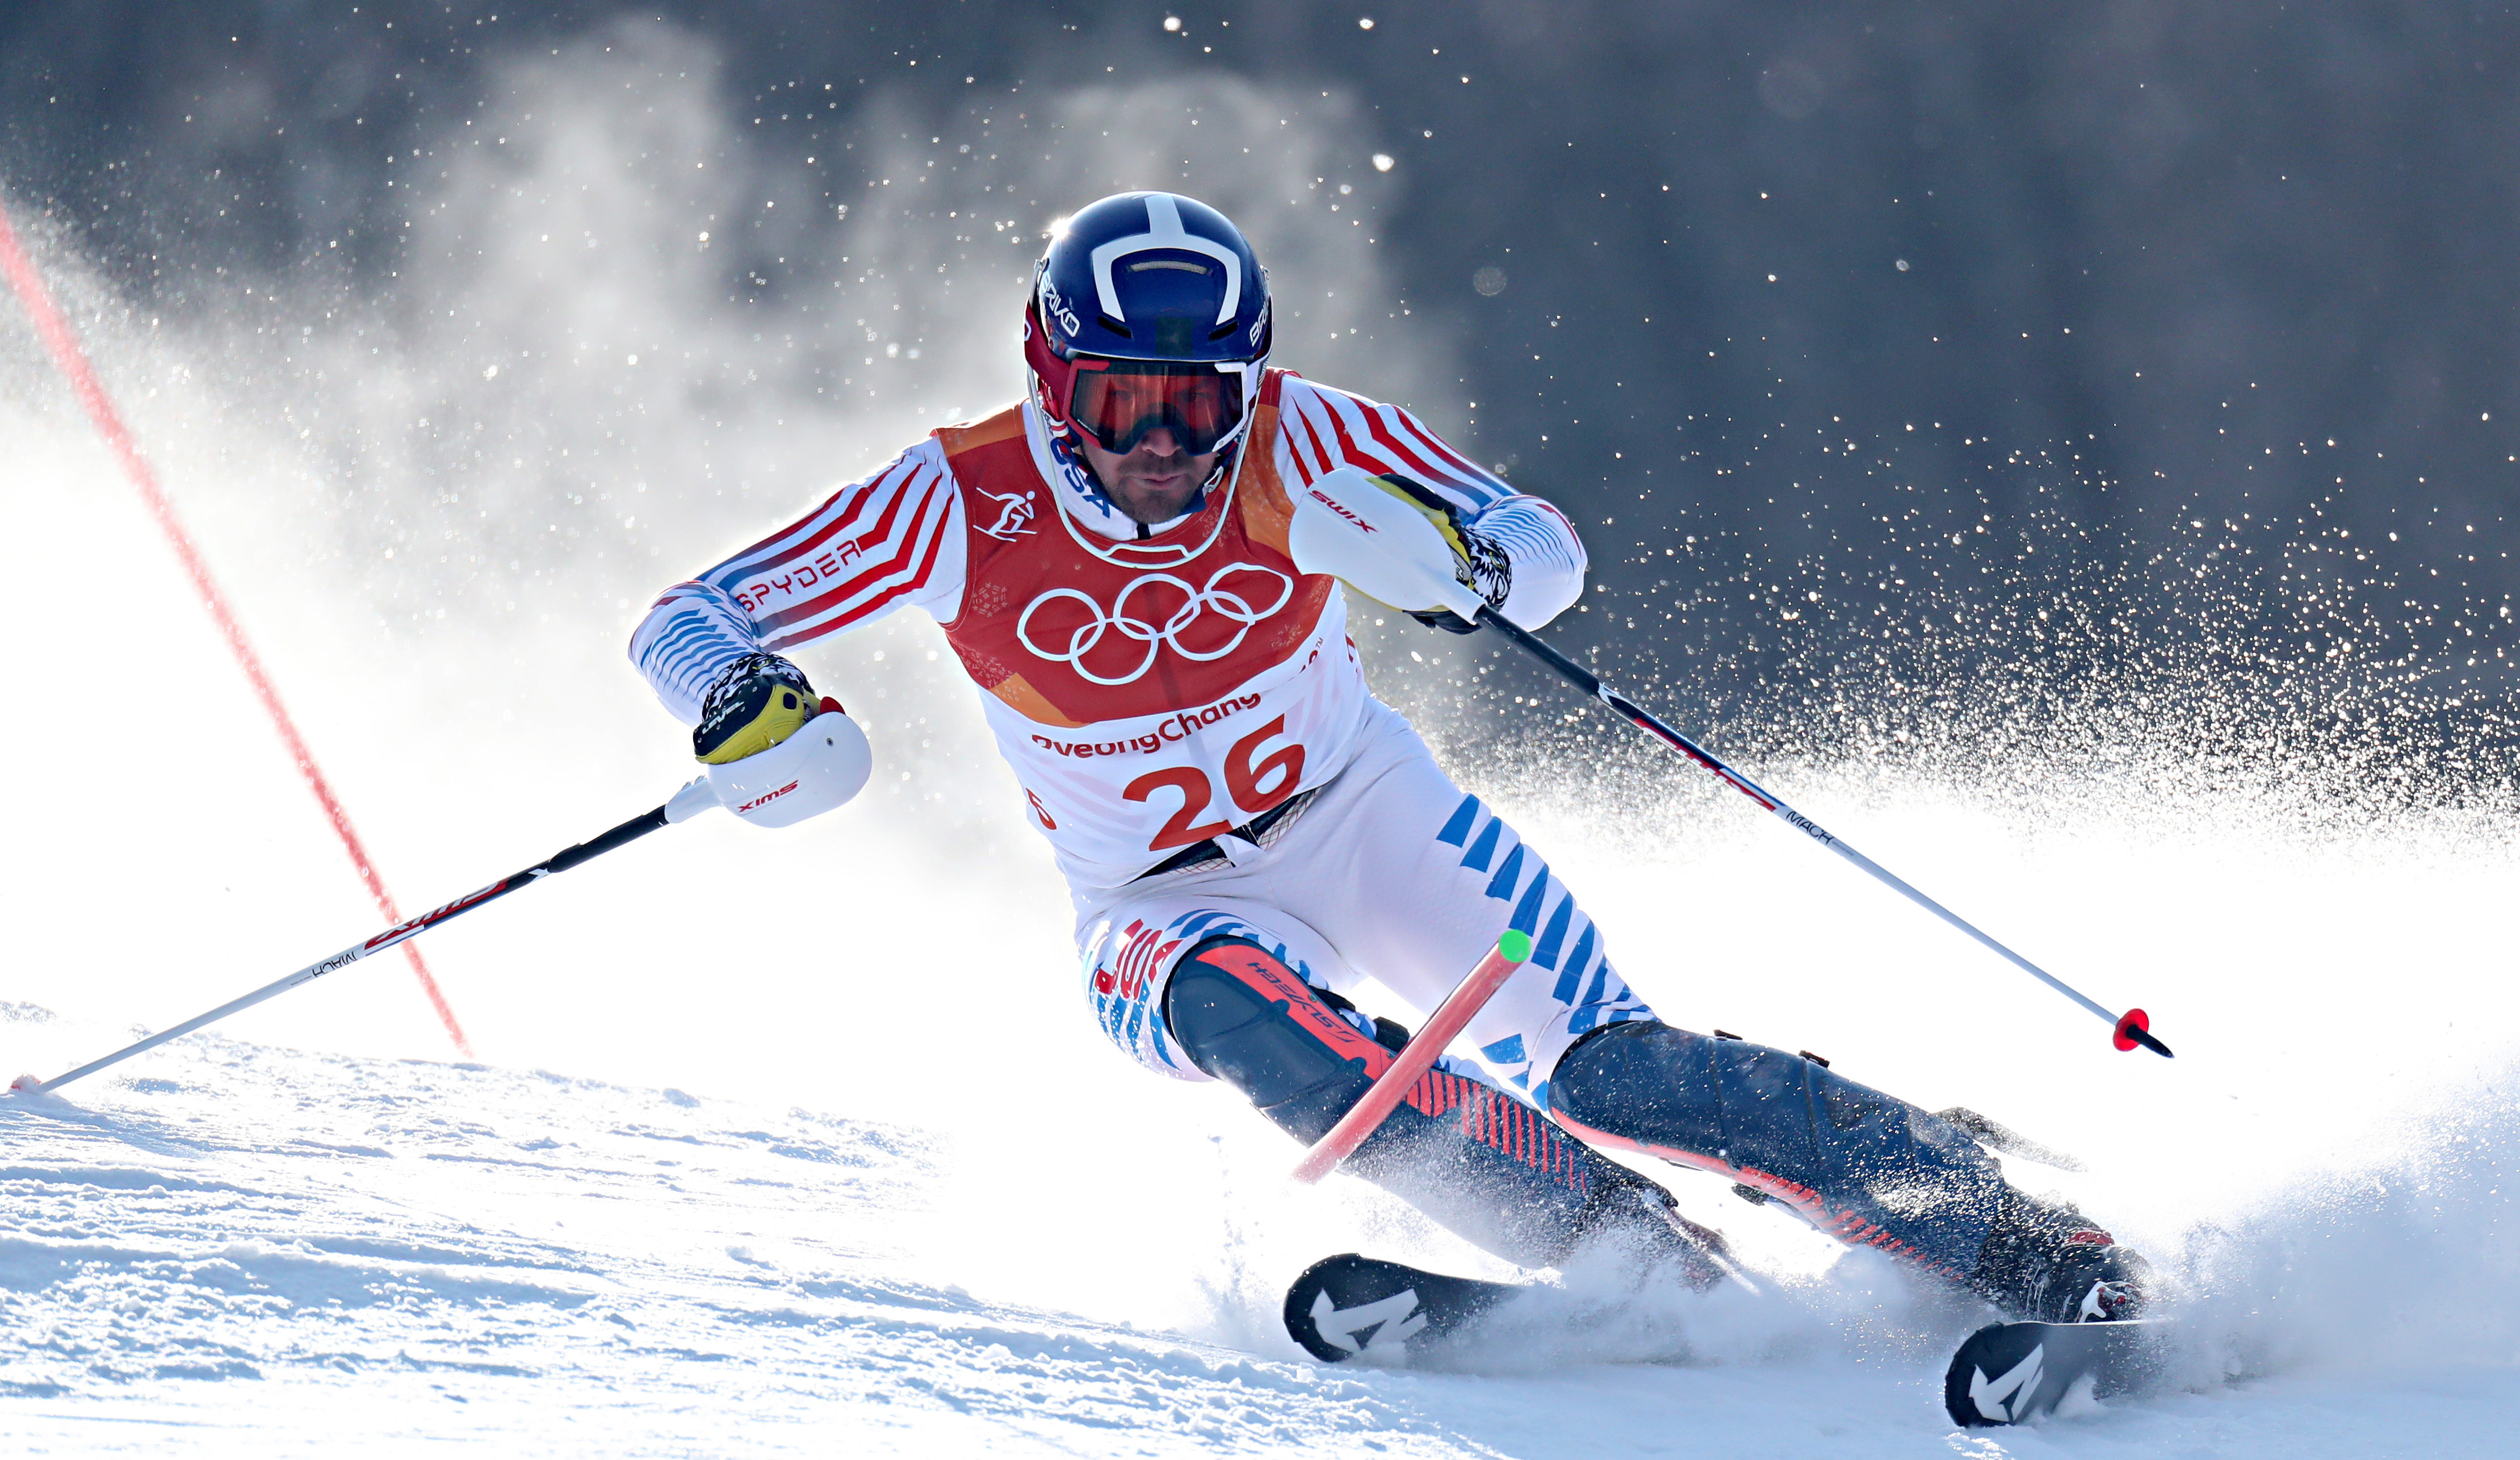 David Chodounsky finished 18th in the slalom Thursday at the 2018 Olympic Winter Games. (Getty Images/AFP – Fabrice Coffrini)